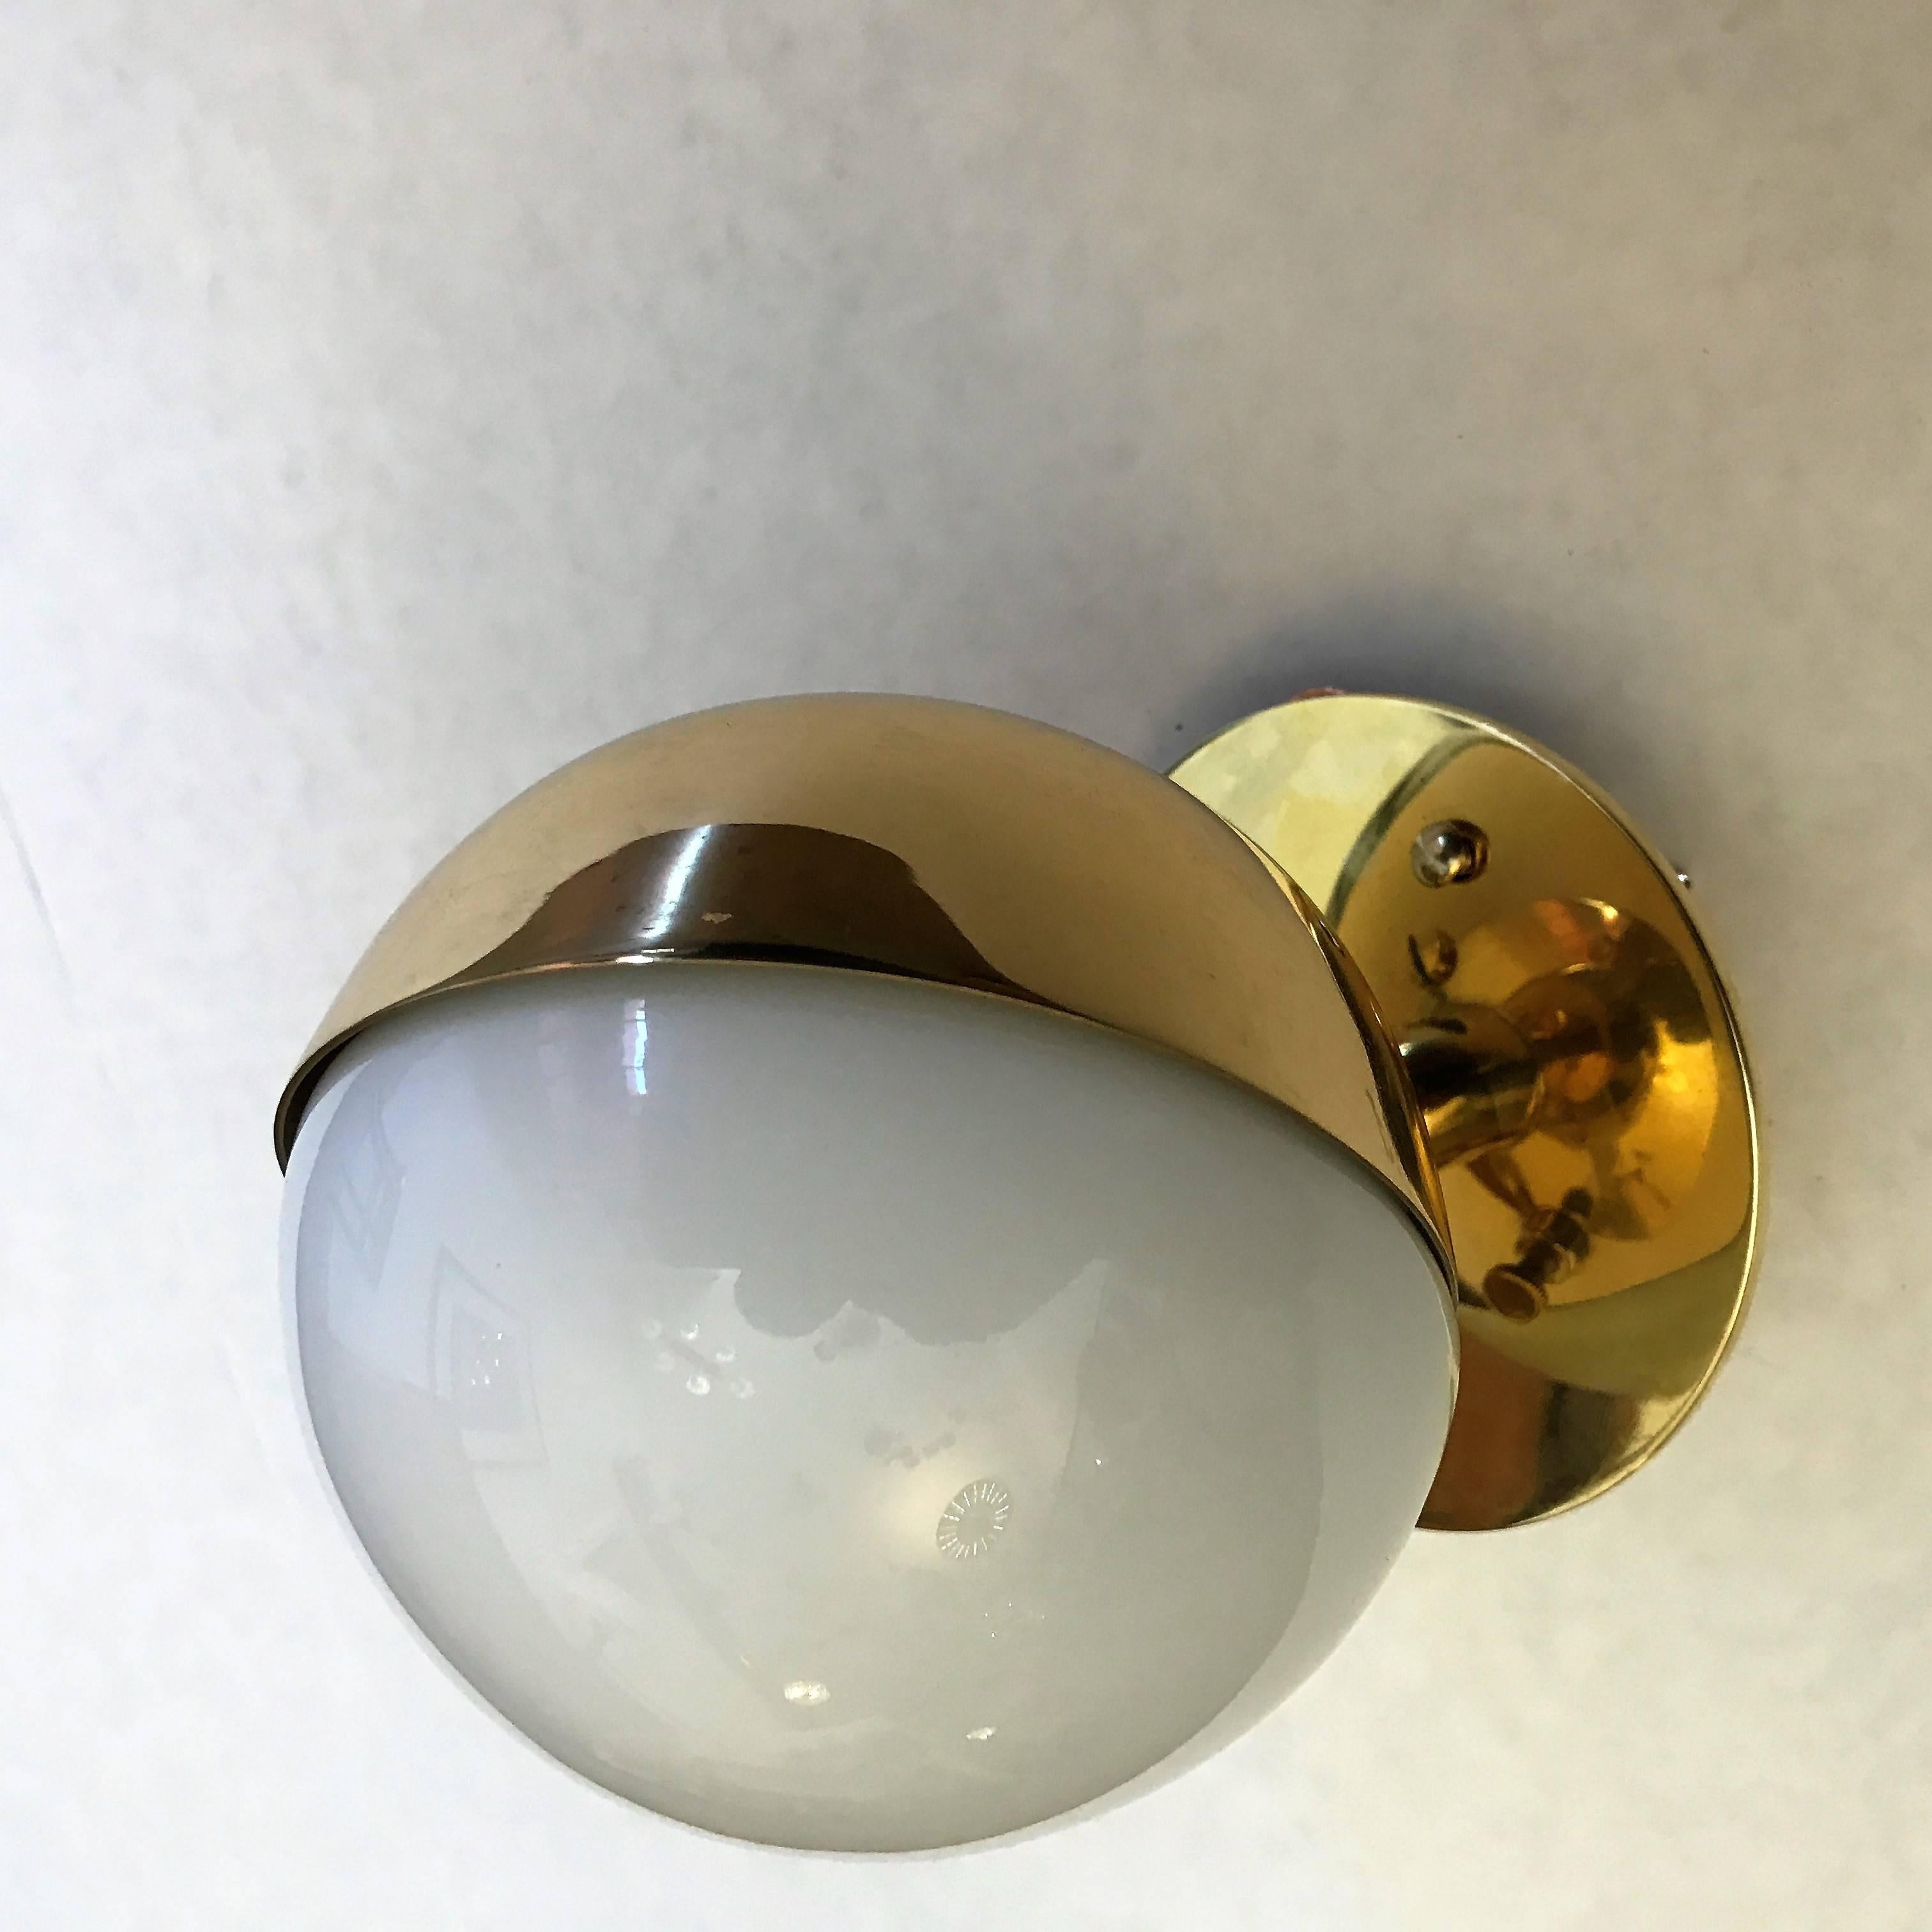 An original set of three  Bauhaus style 1920s polished brass and white opaline glass wall lights designed by Vilhelm Lauritzen for Poulsen. Rewired. The lights can tilt and be set in the optimal direction with its set screw.